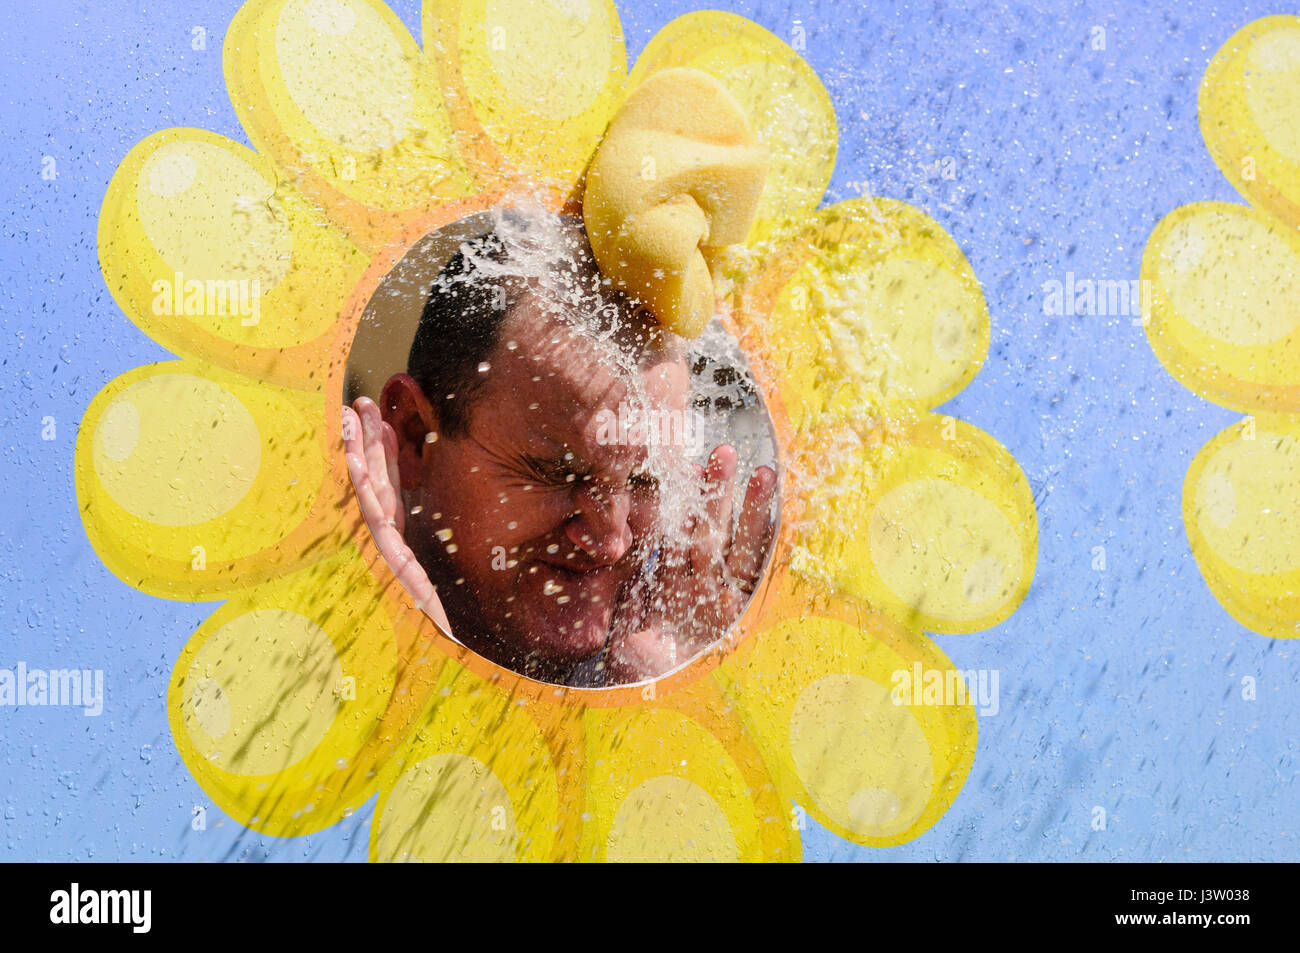 A wet sponge hits a man in the face through a peep board. Stock Photo